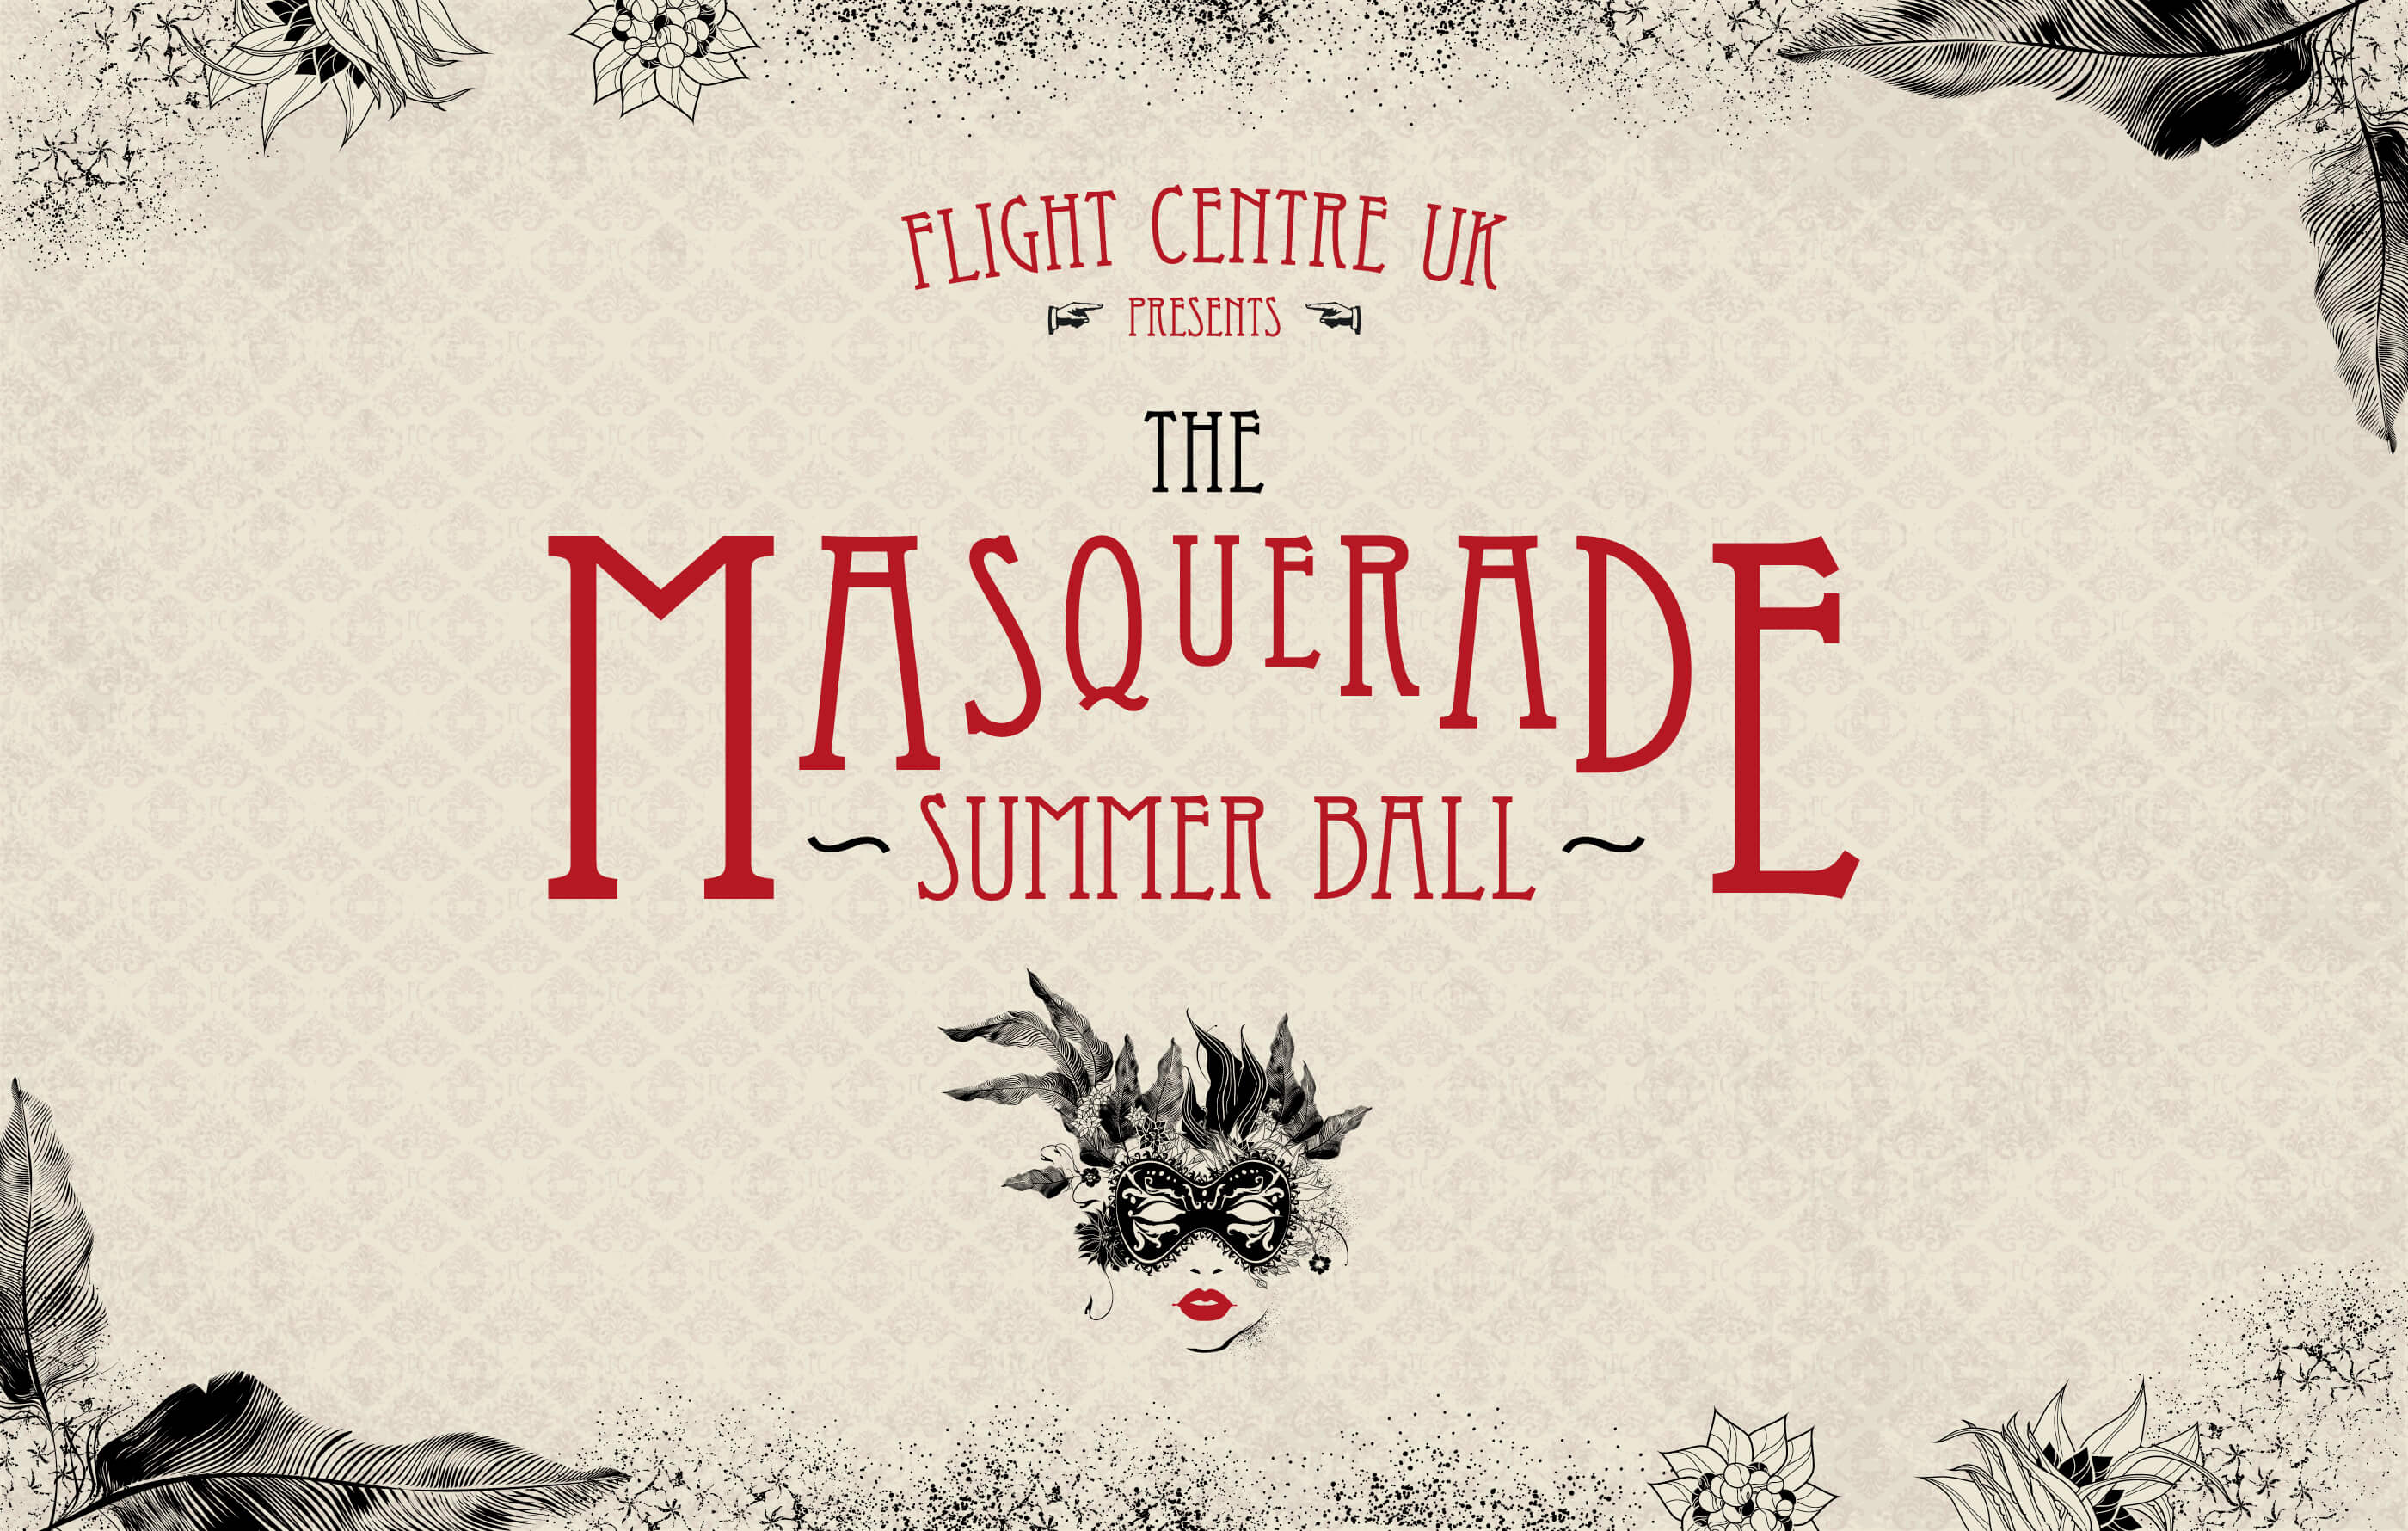 Masquerade Summer Ball logo written in a deep red, art deco font on a beige patterned background with an illustrated black foliage border